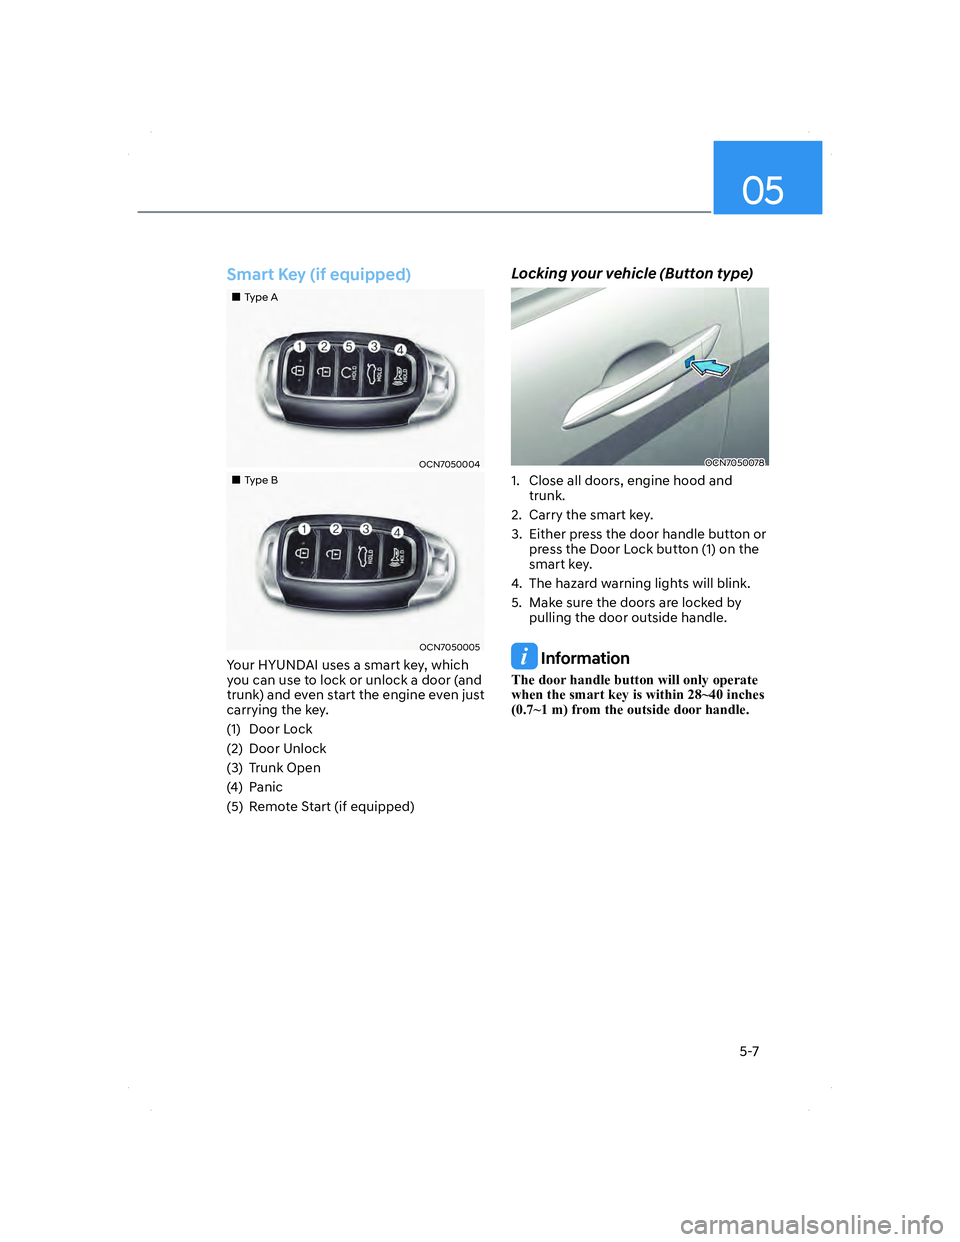 HYUNDAI ELANTRA 2022 Owners Guide 05
5-7
Smart Key (if equipped)
���„�„Type AType A
OCN7050004OCN7050004
���„�„Type BType B
OCN7050005OCN7050005
Your HYUNDAI uses a smart key, which 
you can use to lock or unlock a door (a